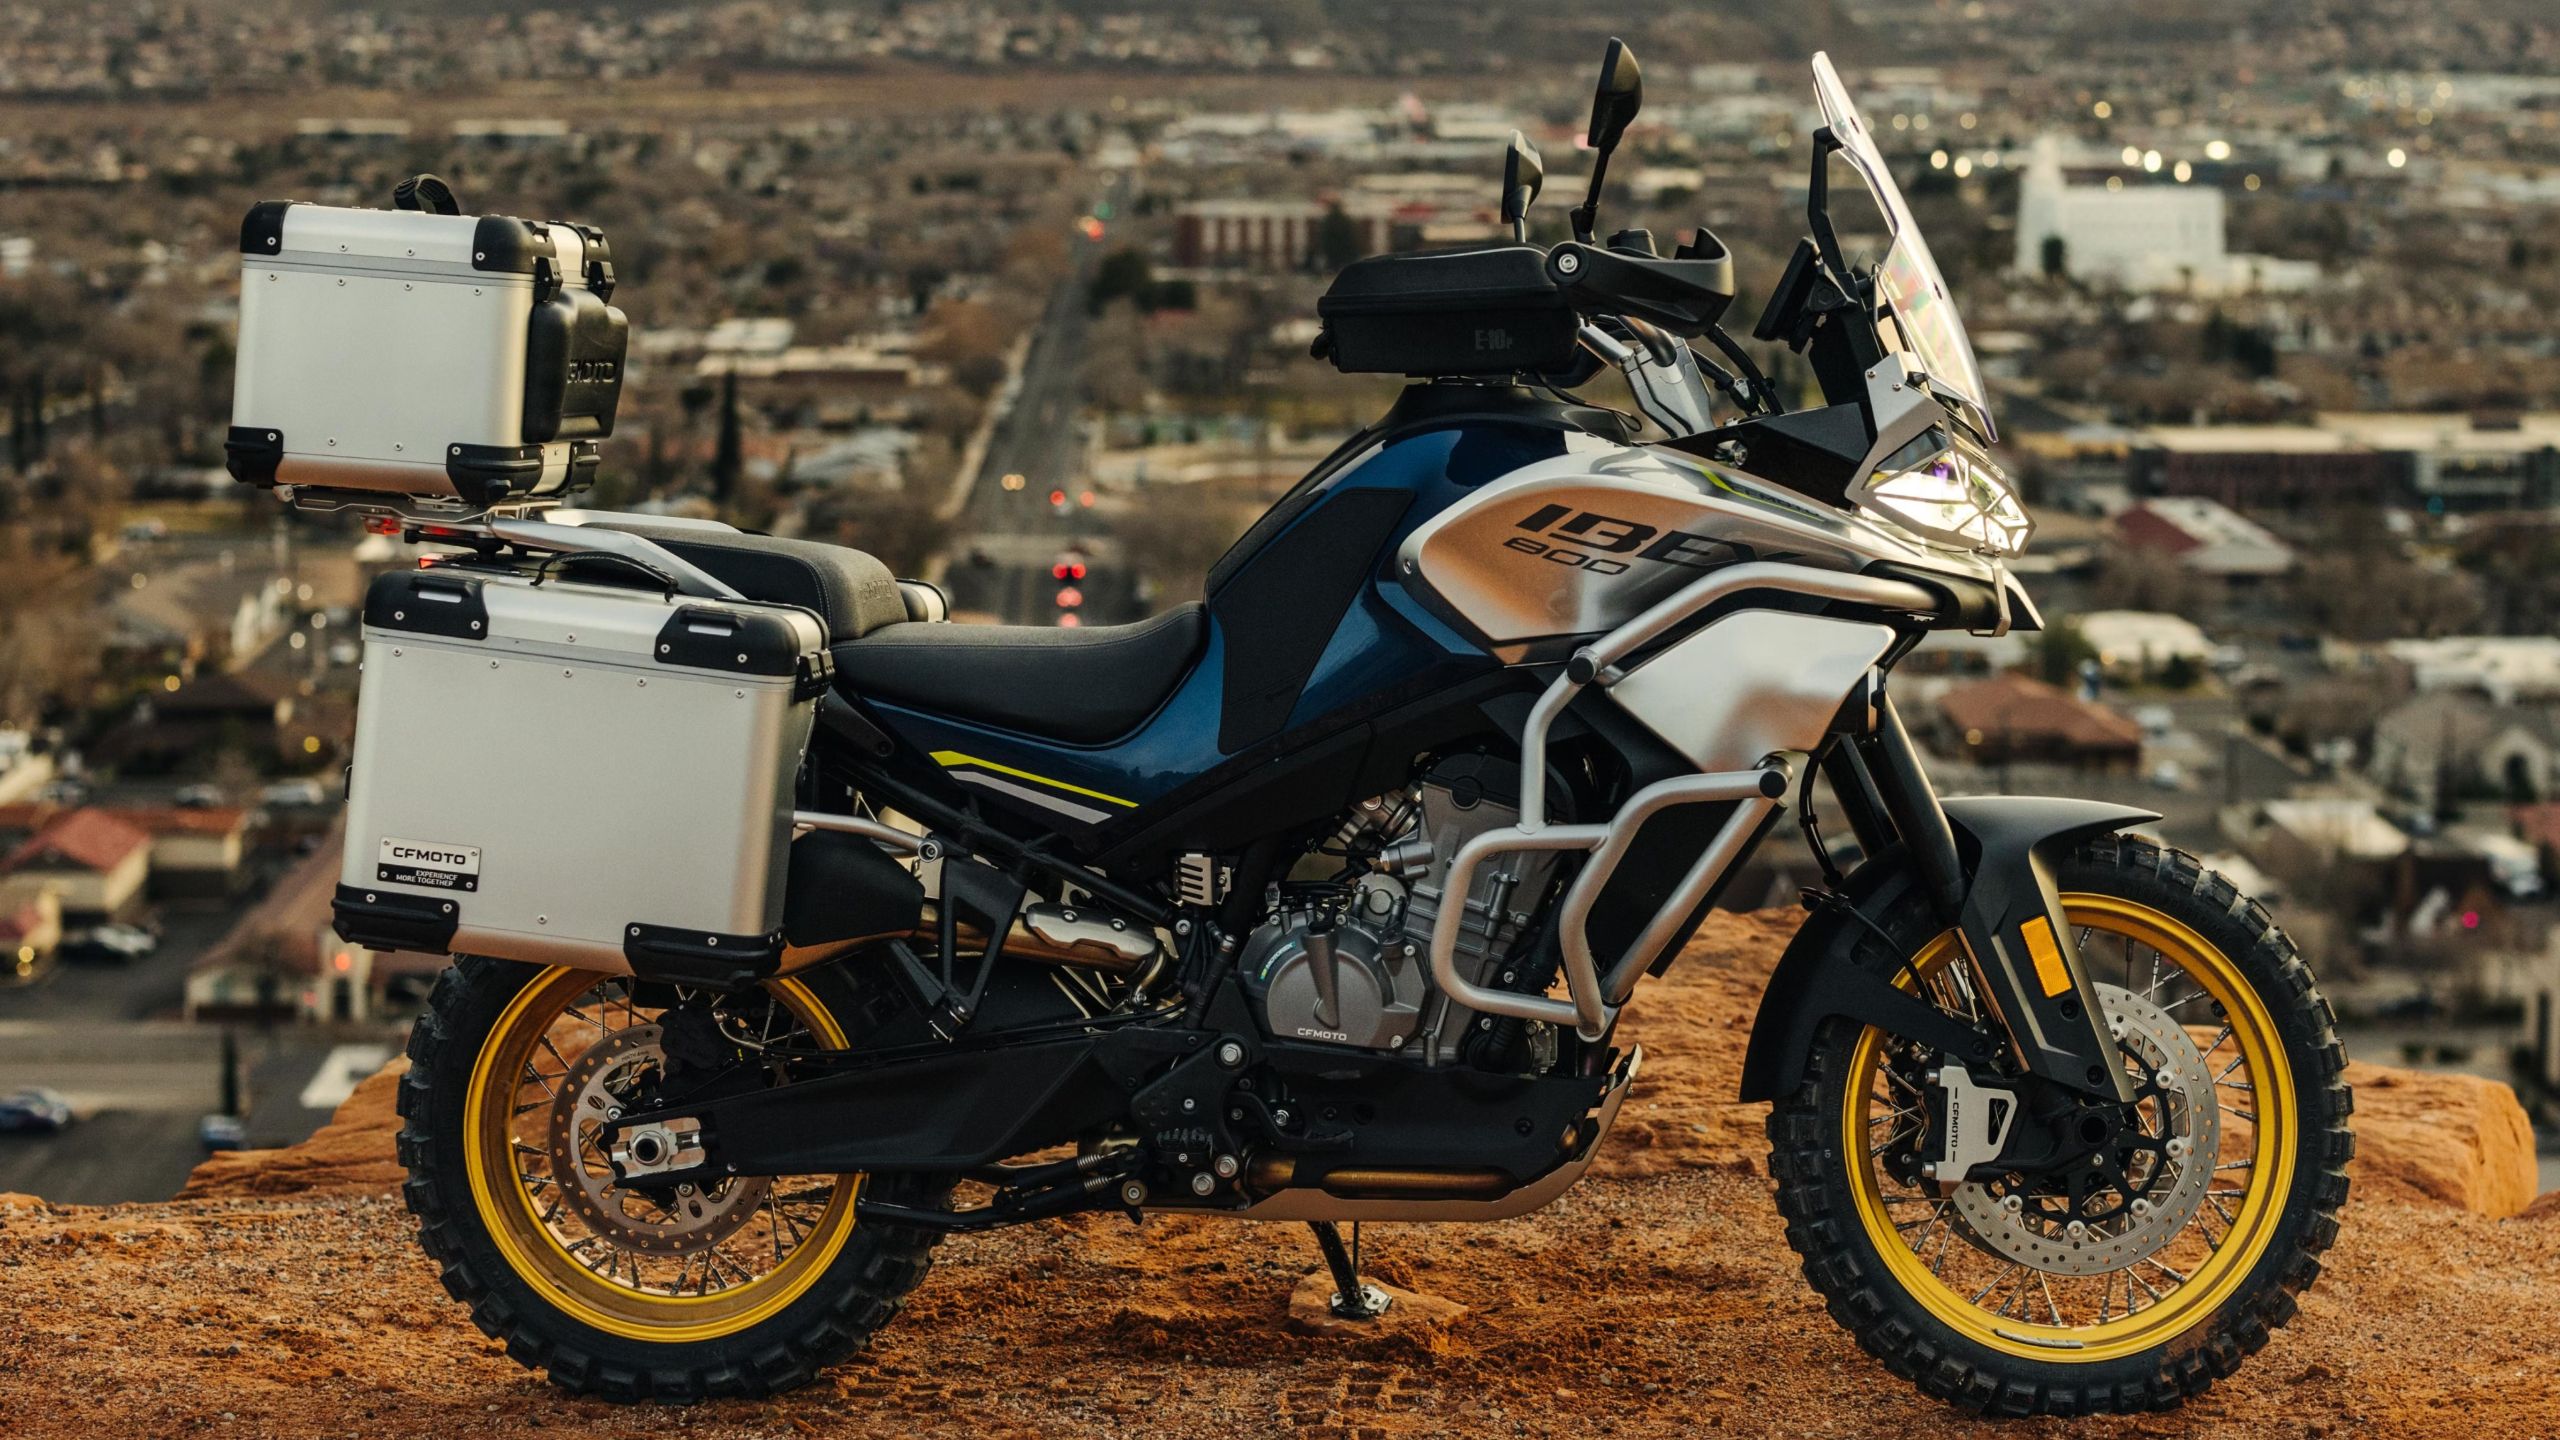 10 Things We Like About The CFMoto Ibex 800 T